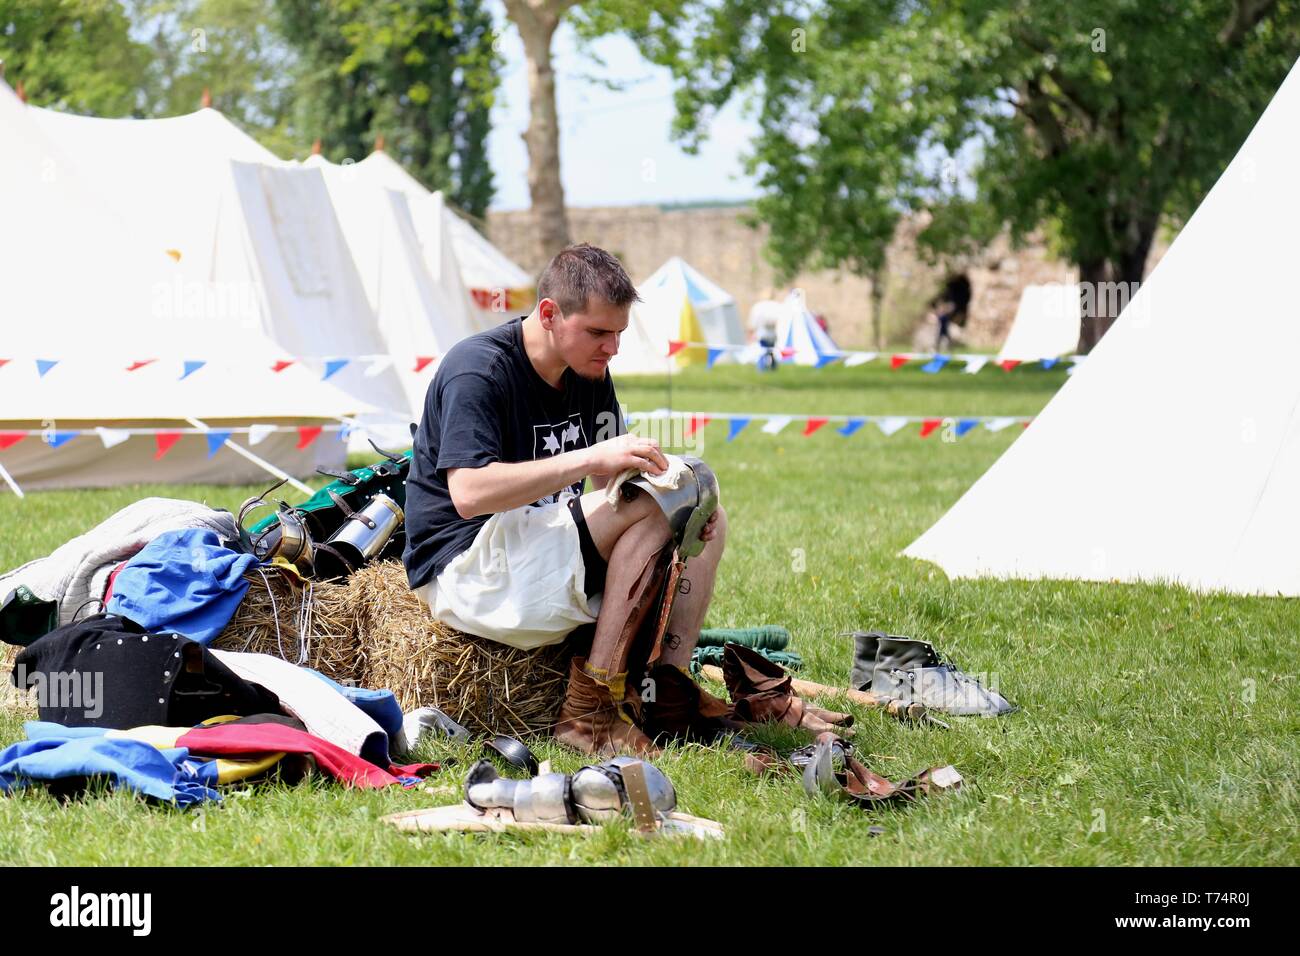 Smederevo. 2nd May, 2019. A competitor cleans his armor after a fight at the opening day of the 10th World National HMB (Historic Medieval Battle) Championship in Smederevo, Serbia on May 2, 2019. Fighters from 40 countries gathered in the Serbian city of Smederevo for an unusual international tournament that recreates historic battle techniques-the World National HMB Championship. The Chinese team is made up of 27 members, and it is China's third appearance at the event. Credit: Shi Zhongyu/Xinhua/Alamy Live News Stock Photo